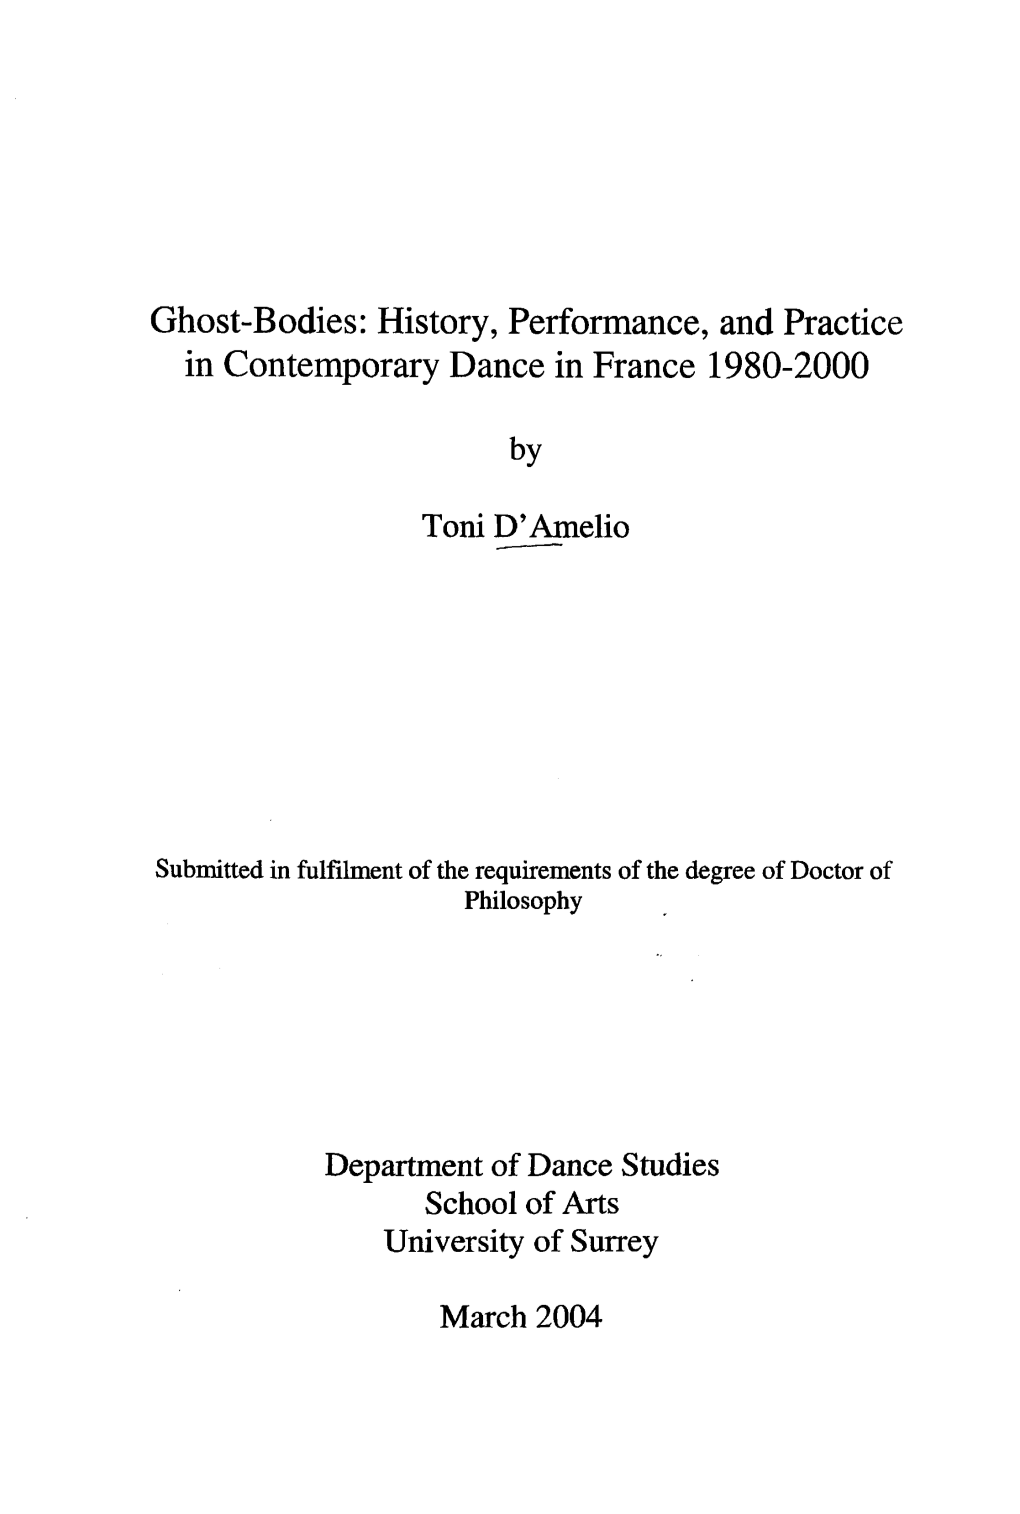 Ghost-Bodies; History, Performance, and Practice in Contemporary Dance in France 1980-2000